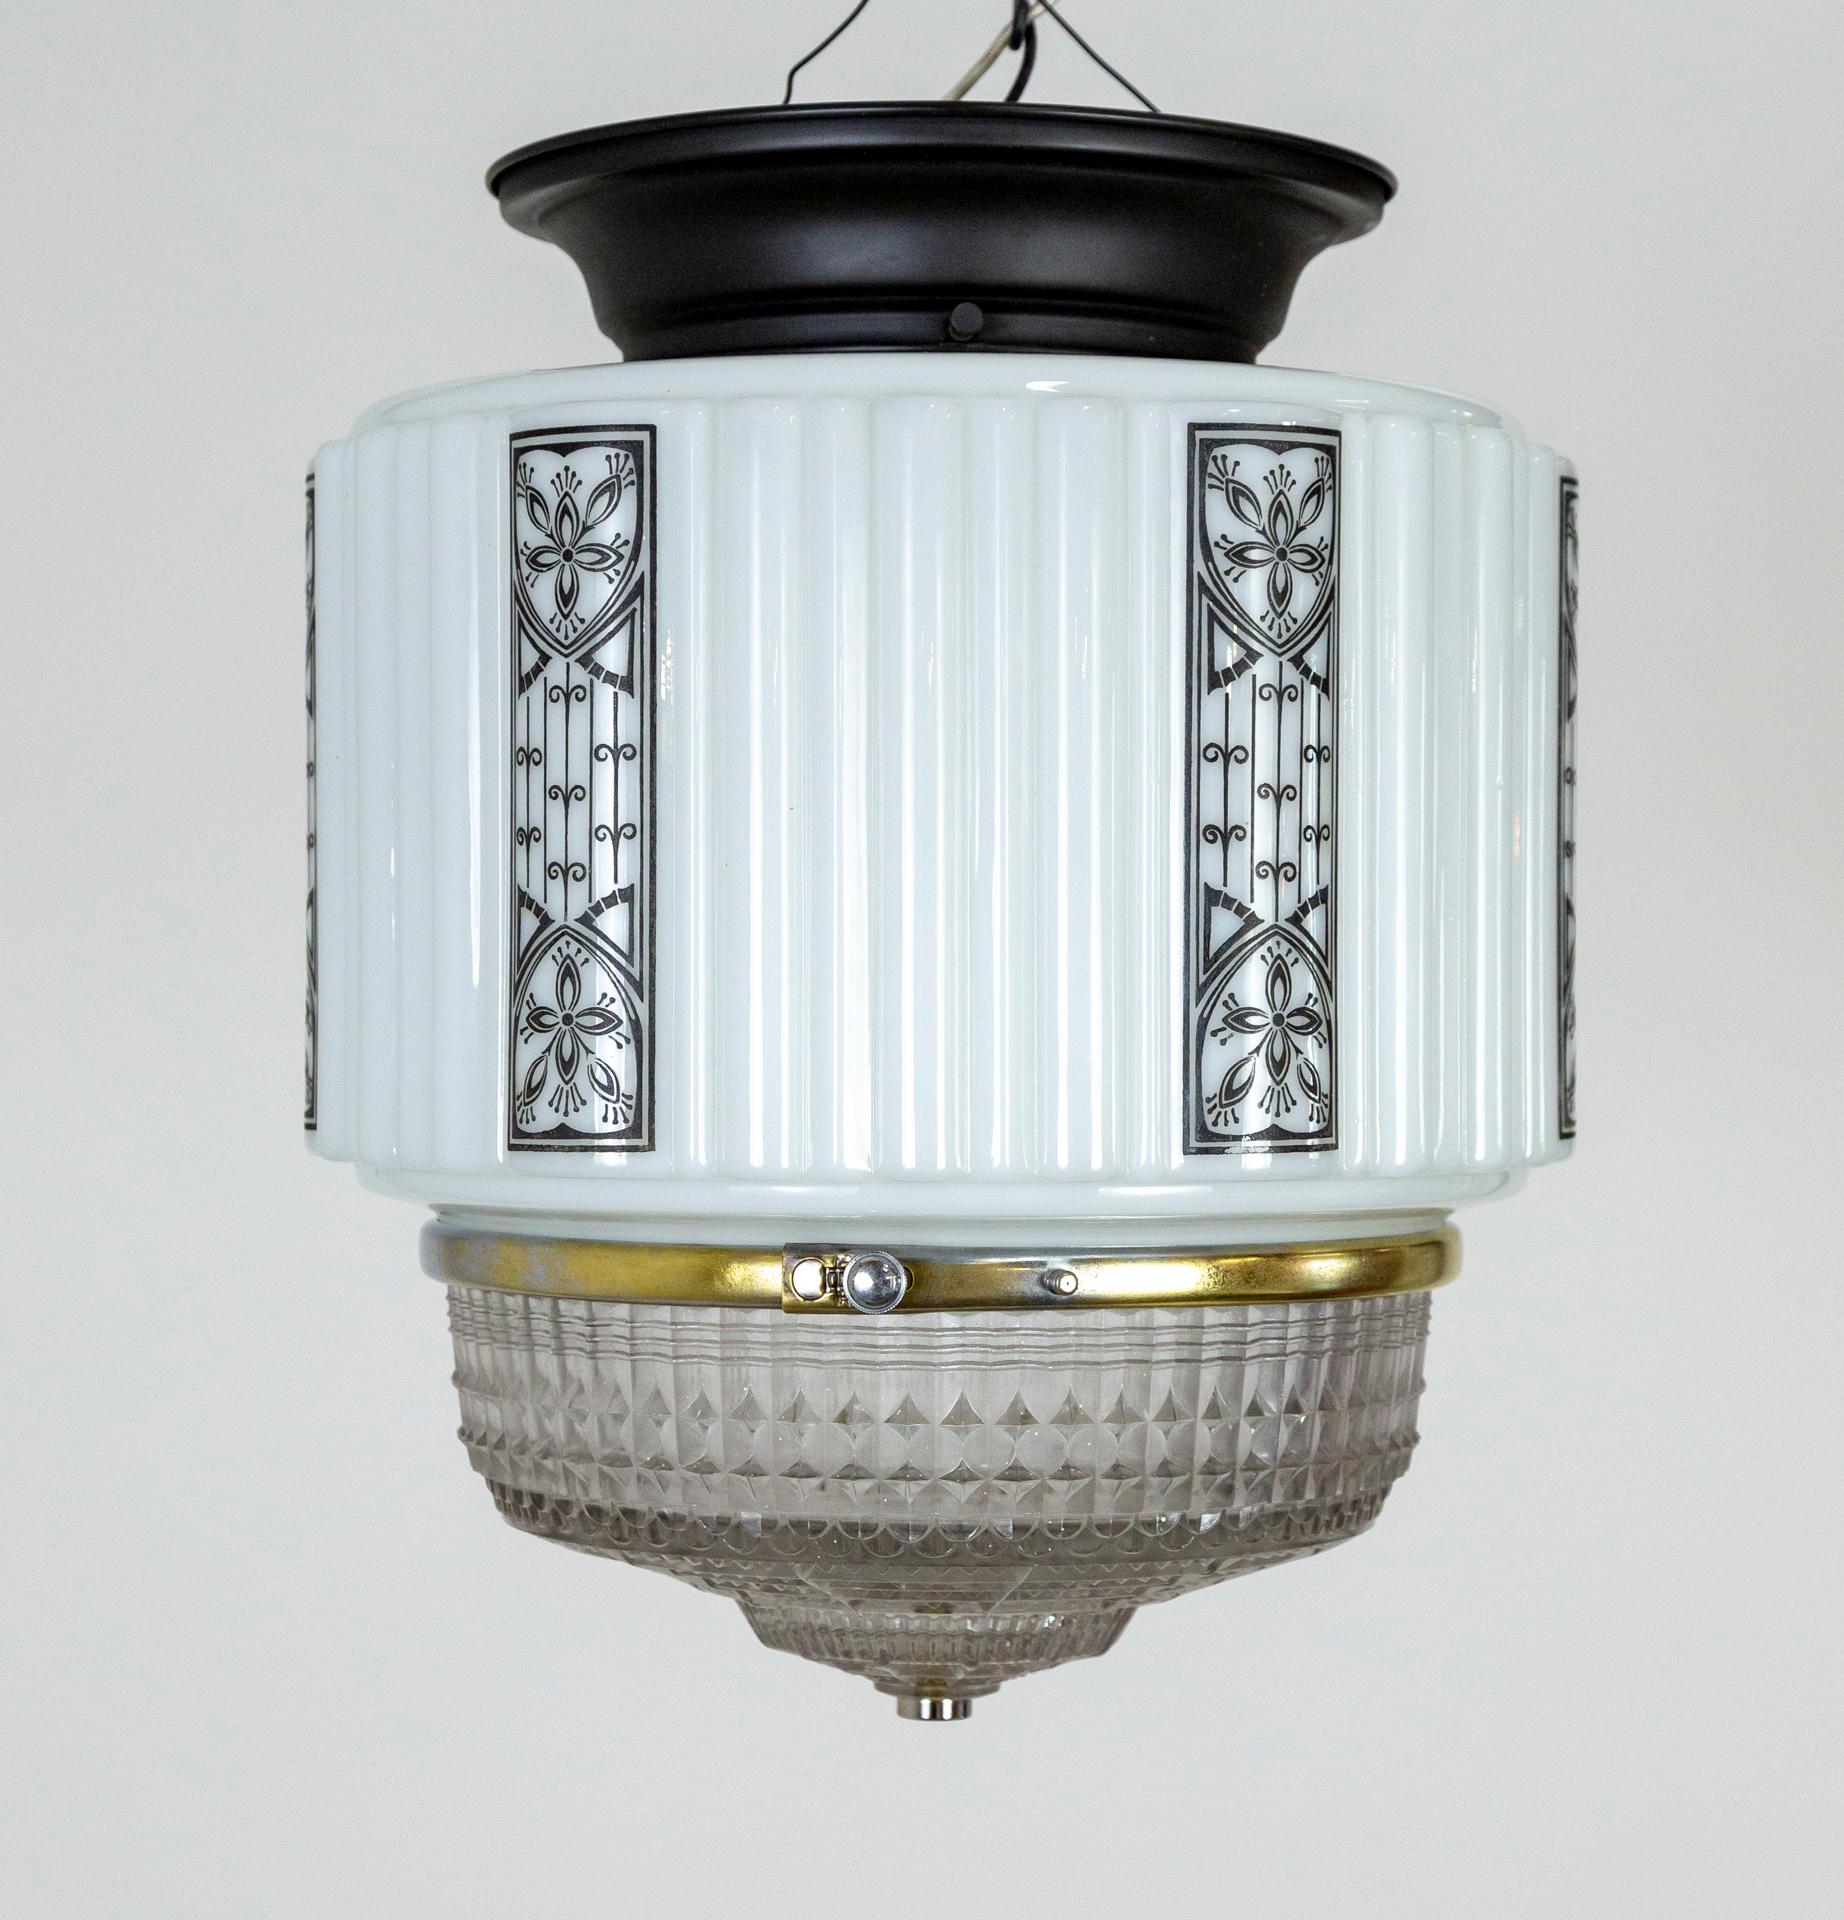 A flush mount ceiling light made of milk glass in a cylindrical form with columns of stenciled black Deco patterns; and a textured, molded, clear glass diffuser. It has a black mount and one medium base socket. Newly wired. One of the printed